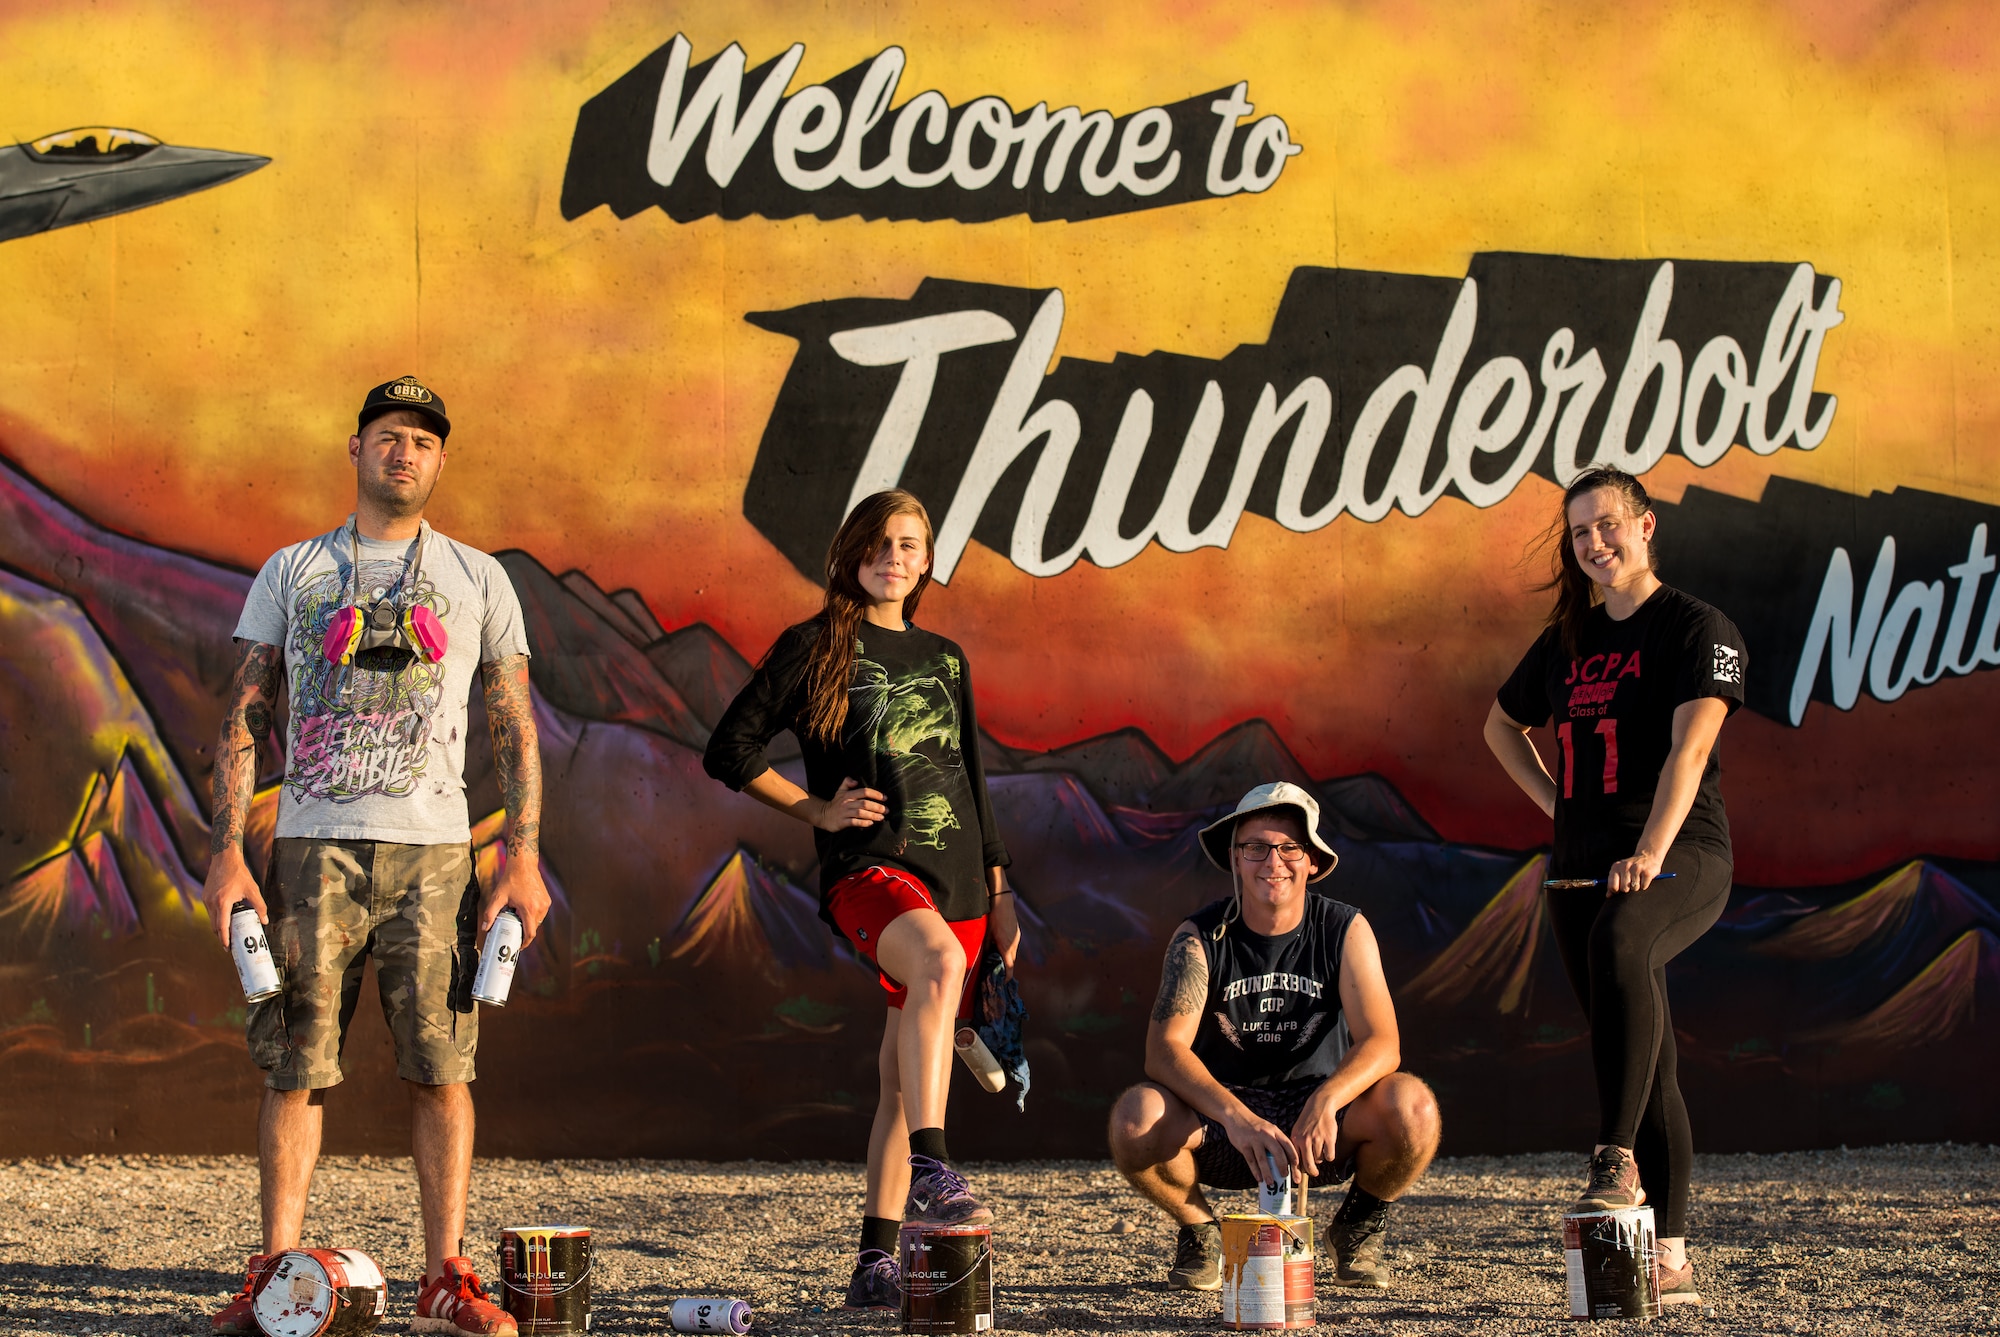 The team of Thunderbolt artists pose for a group photo in front the “Welcome to Thunderbolt Nation” mural at Luke Air Force Base, Ariz., May 9, 2018. Over the course of a month, the team worked together to complete the mural, which represents Luke’s heritage. (U.S. Air Force photo by Airman 1st Class Alexander Cook)